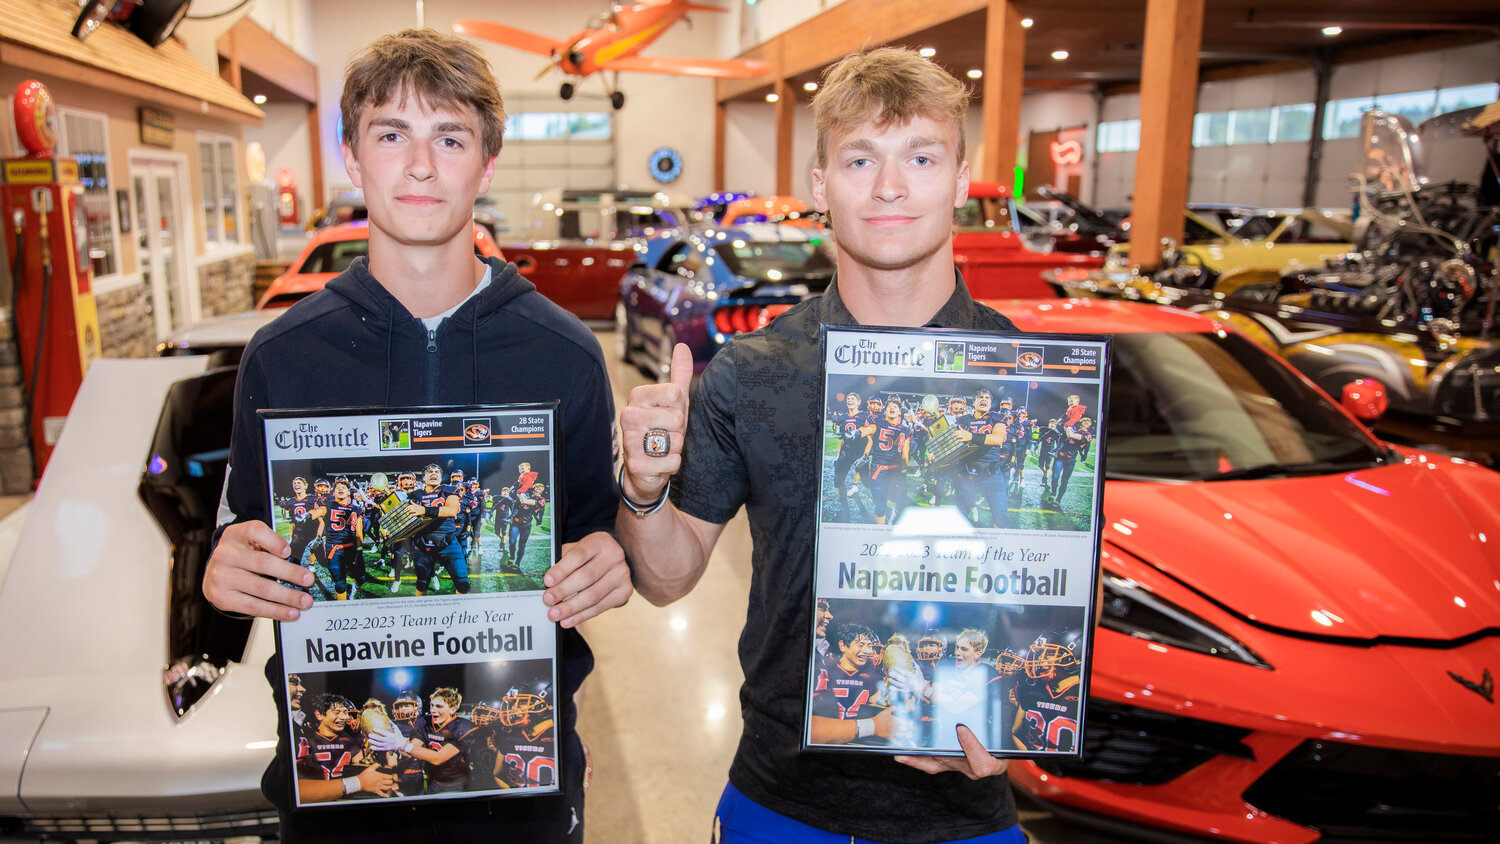 Napavine’s James Grose and Max O’Neill accepted the “Team of the Year” award for Napavine Football after outscoring opponents by an average margin of 52 points leading to the state title game where they avenged a previous defeat to claim the 2B State Championship over Okanogan last December.